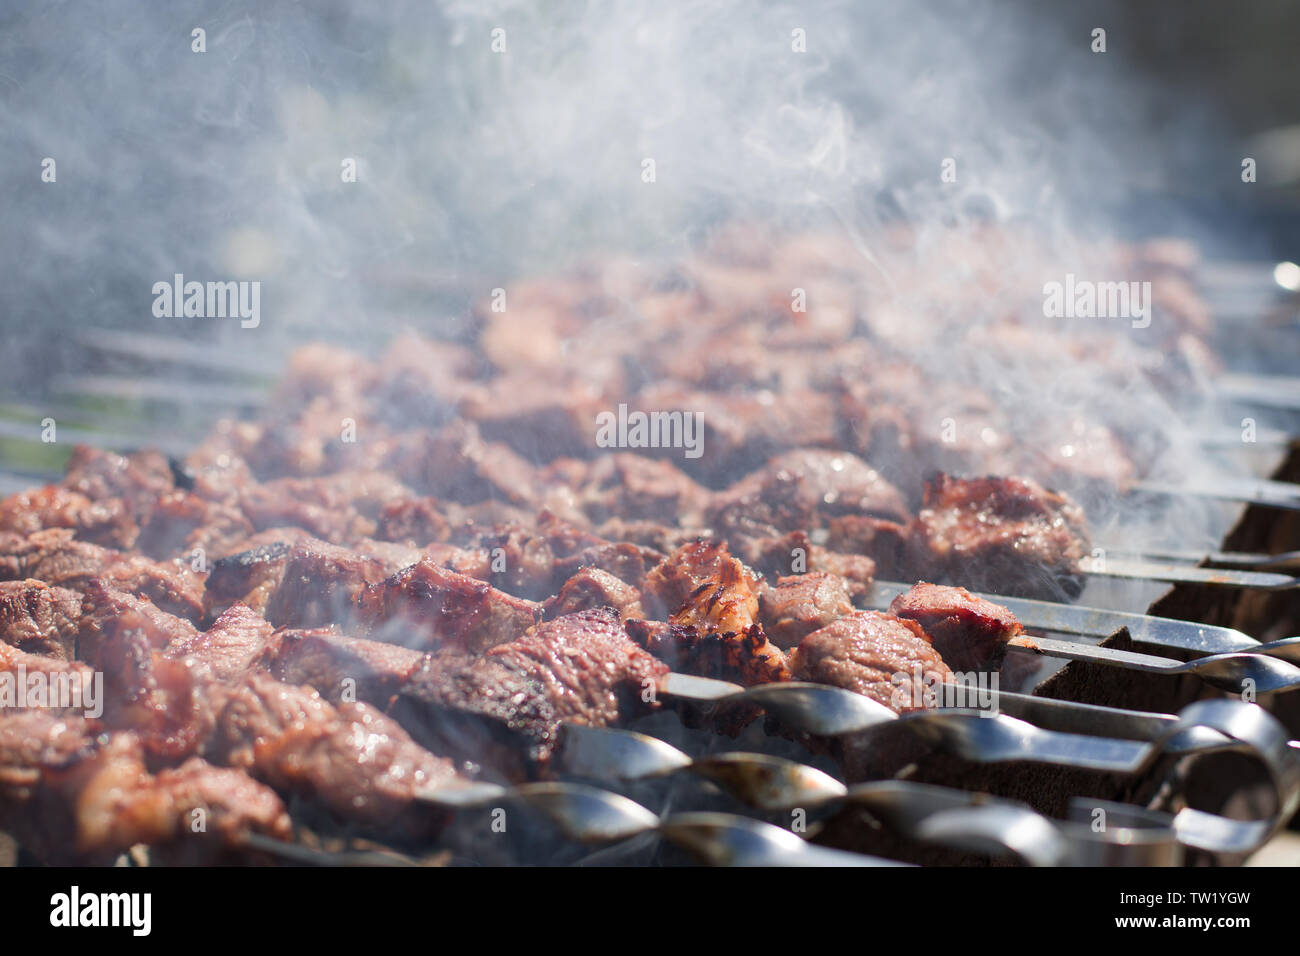 Shashlik or shashlyk preparing on a barbecue grill over charcoal. Grilled cubes of pork meat on metal skewer. Meat on skewers is roasted on fire. Stock Photo